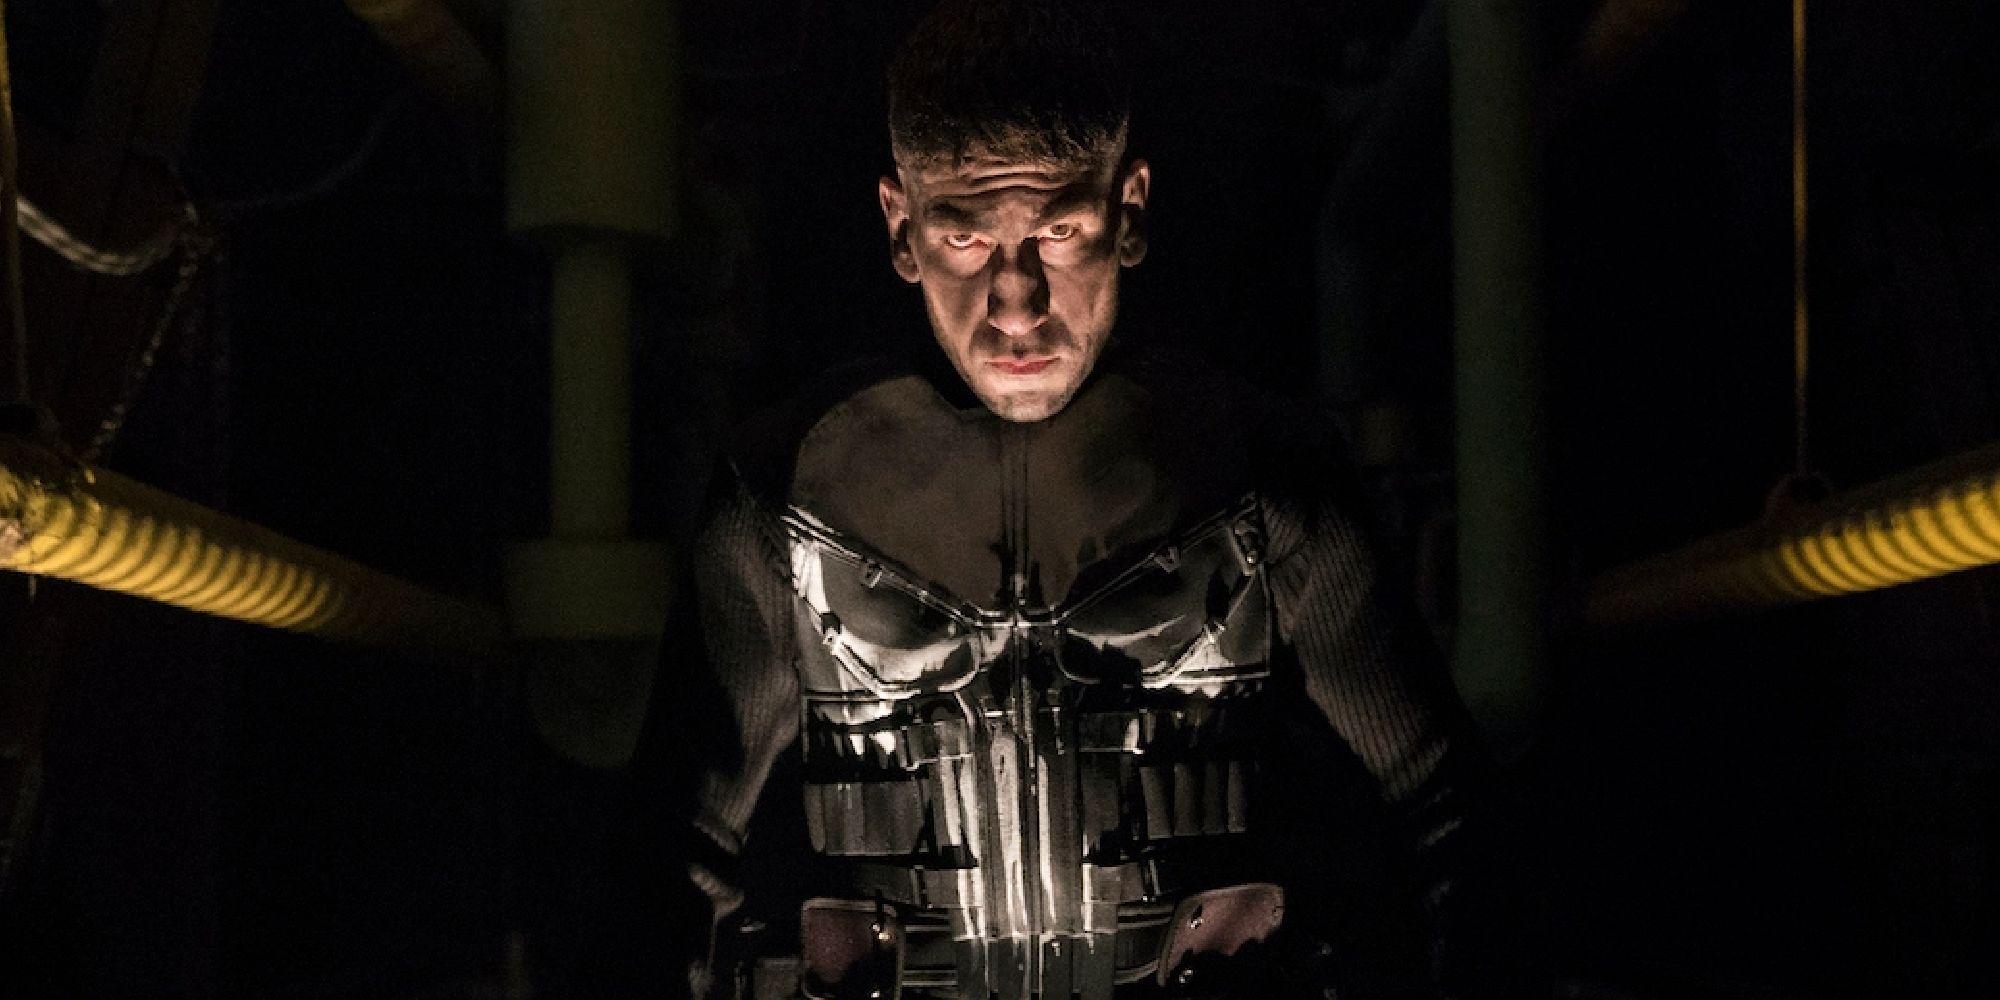 Jon Bernthal as Frank Castle in The Punisher series